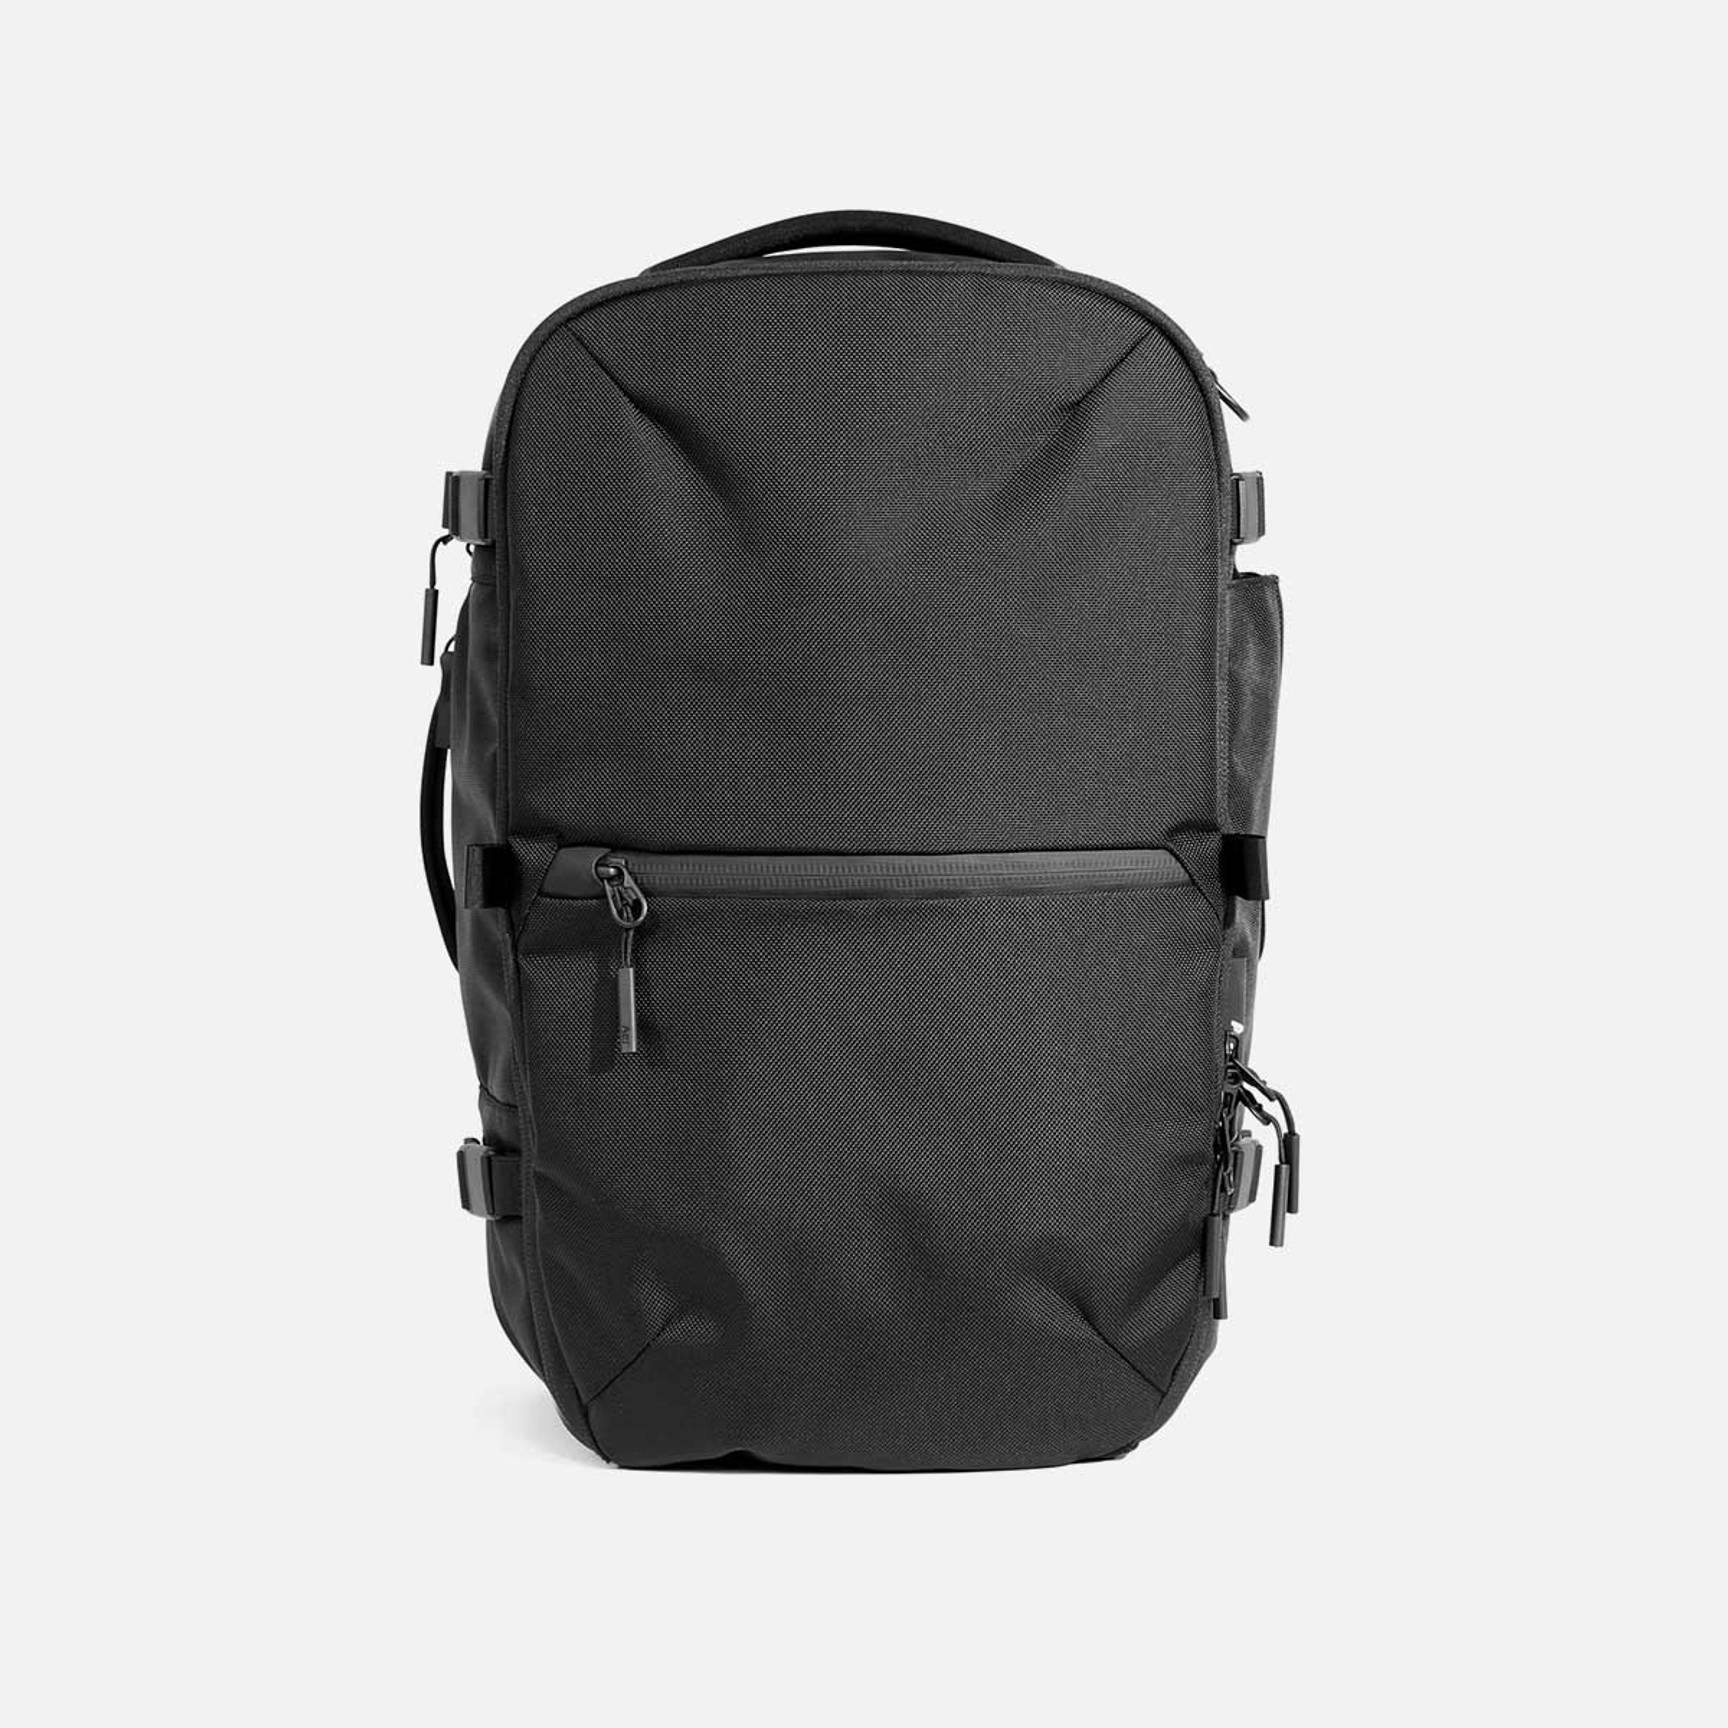 https://cld.accentuate.io/39443422969952/1647455136690/AER21032_travelpack3_black_front.jpg?v=0&options=w_1728